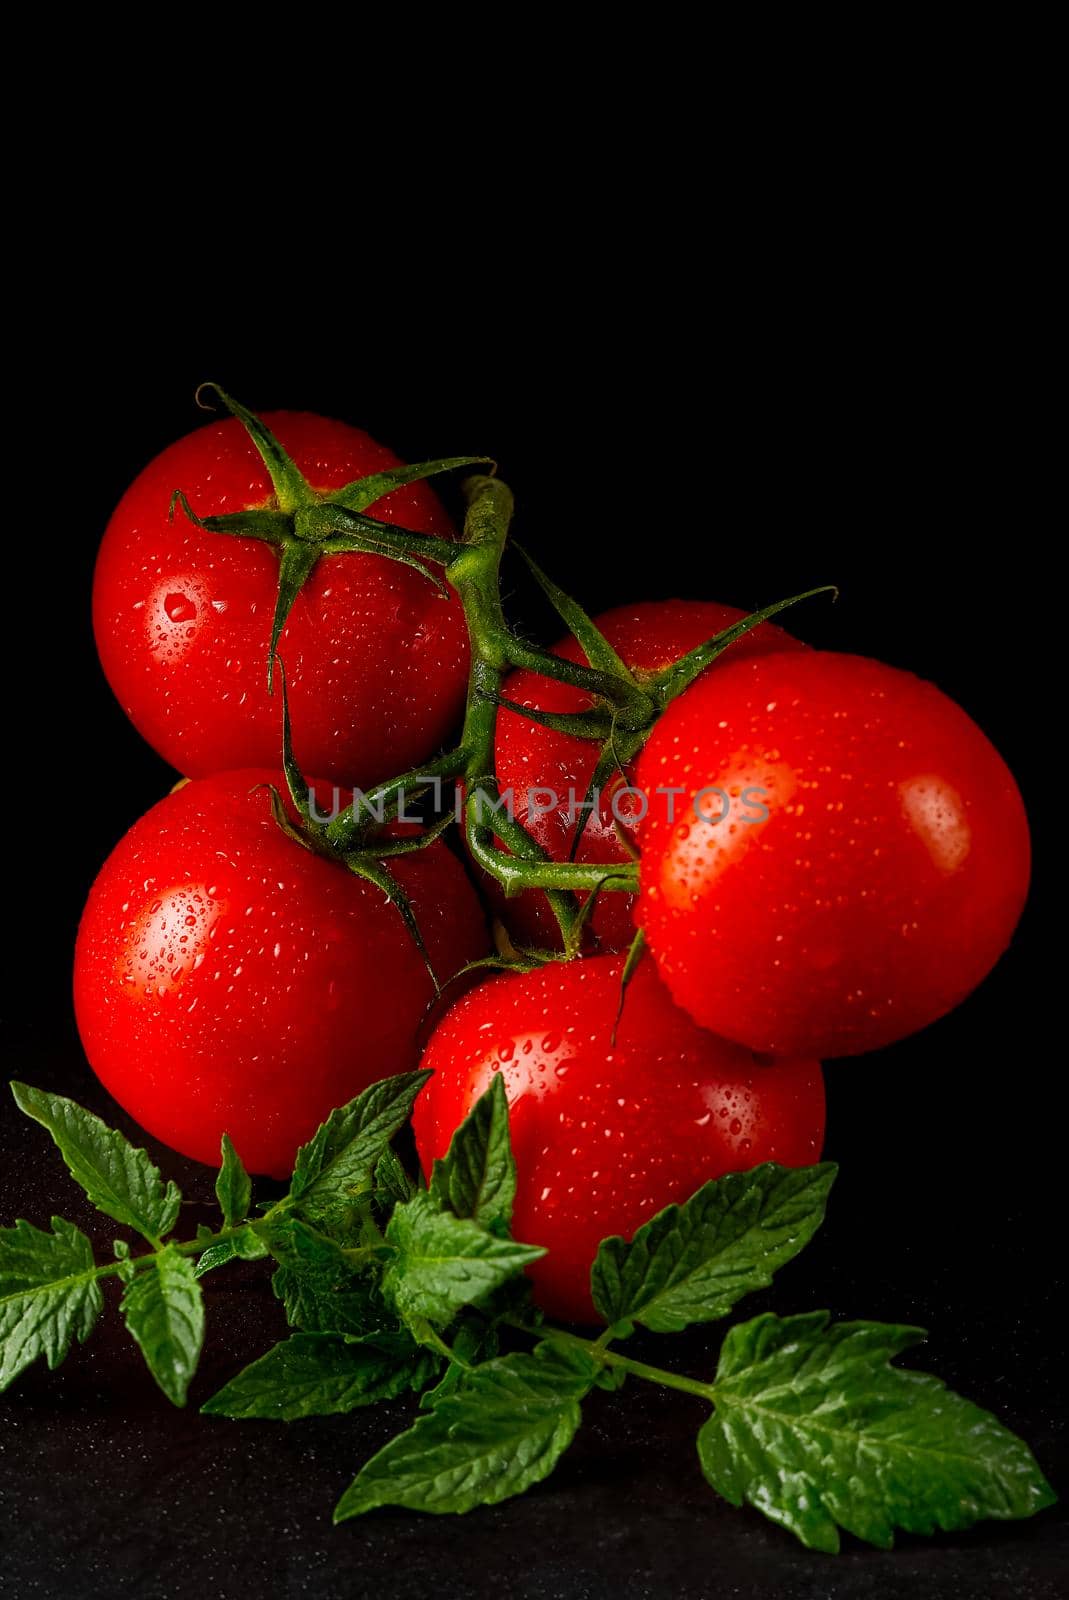 Organic tomatoes on the black table in low key, with water drops